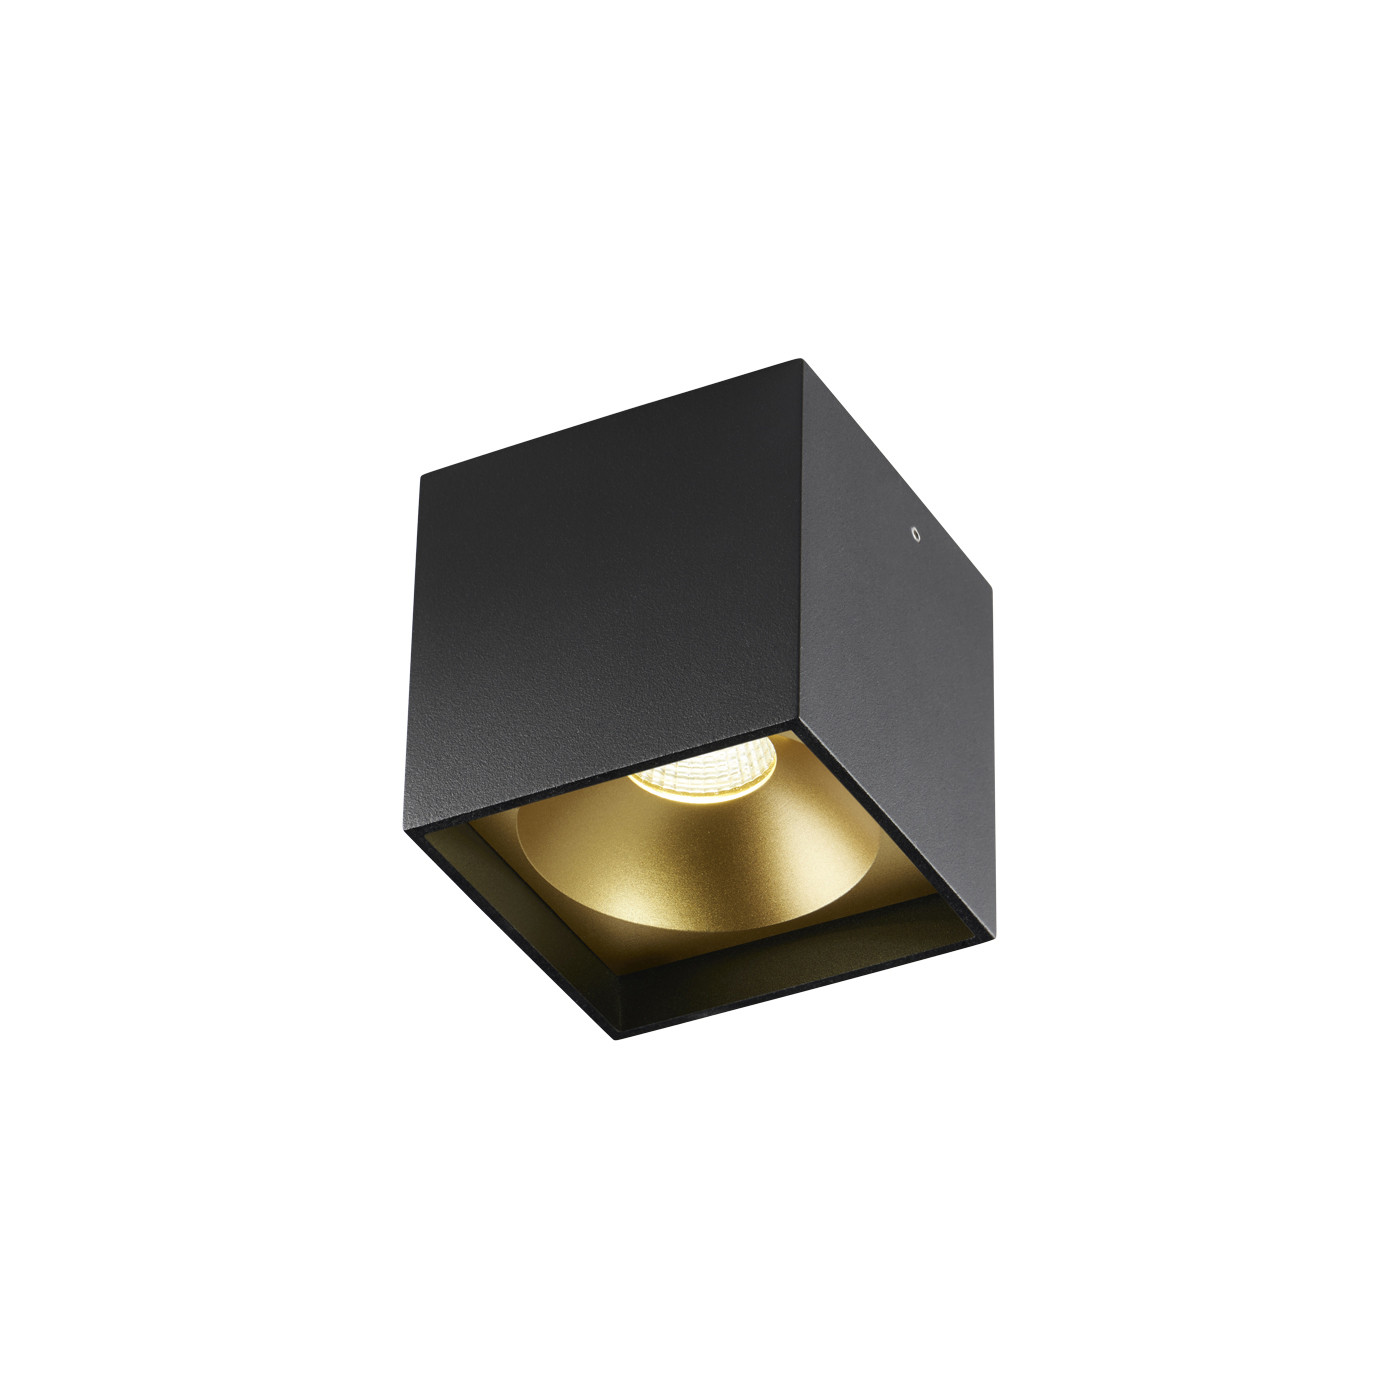 Light Point Solo Square Ceiling Light At Nostraforma